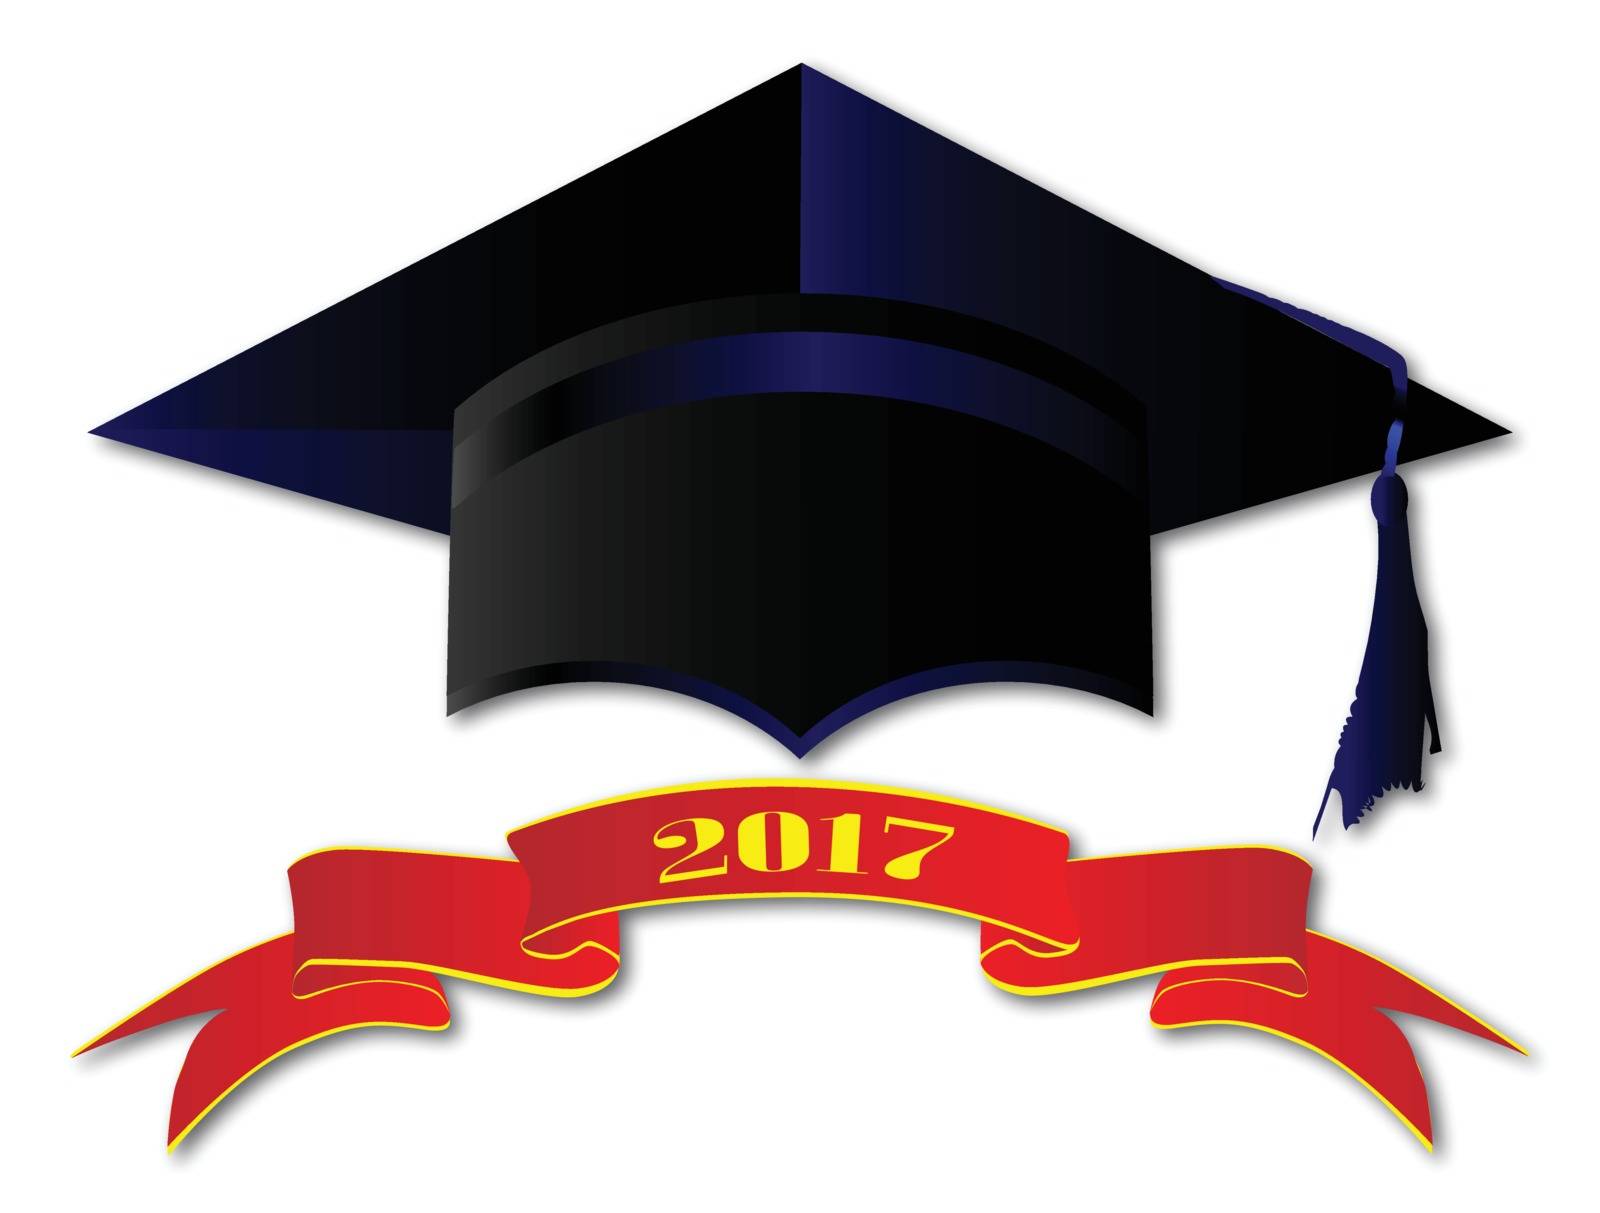 A university cap with banner showing 2017